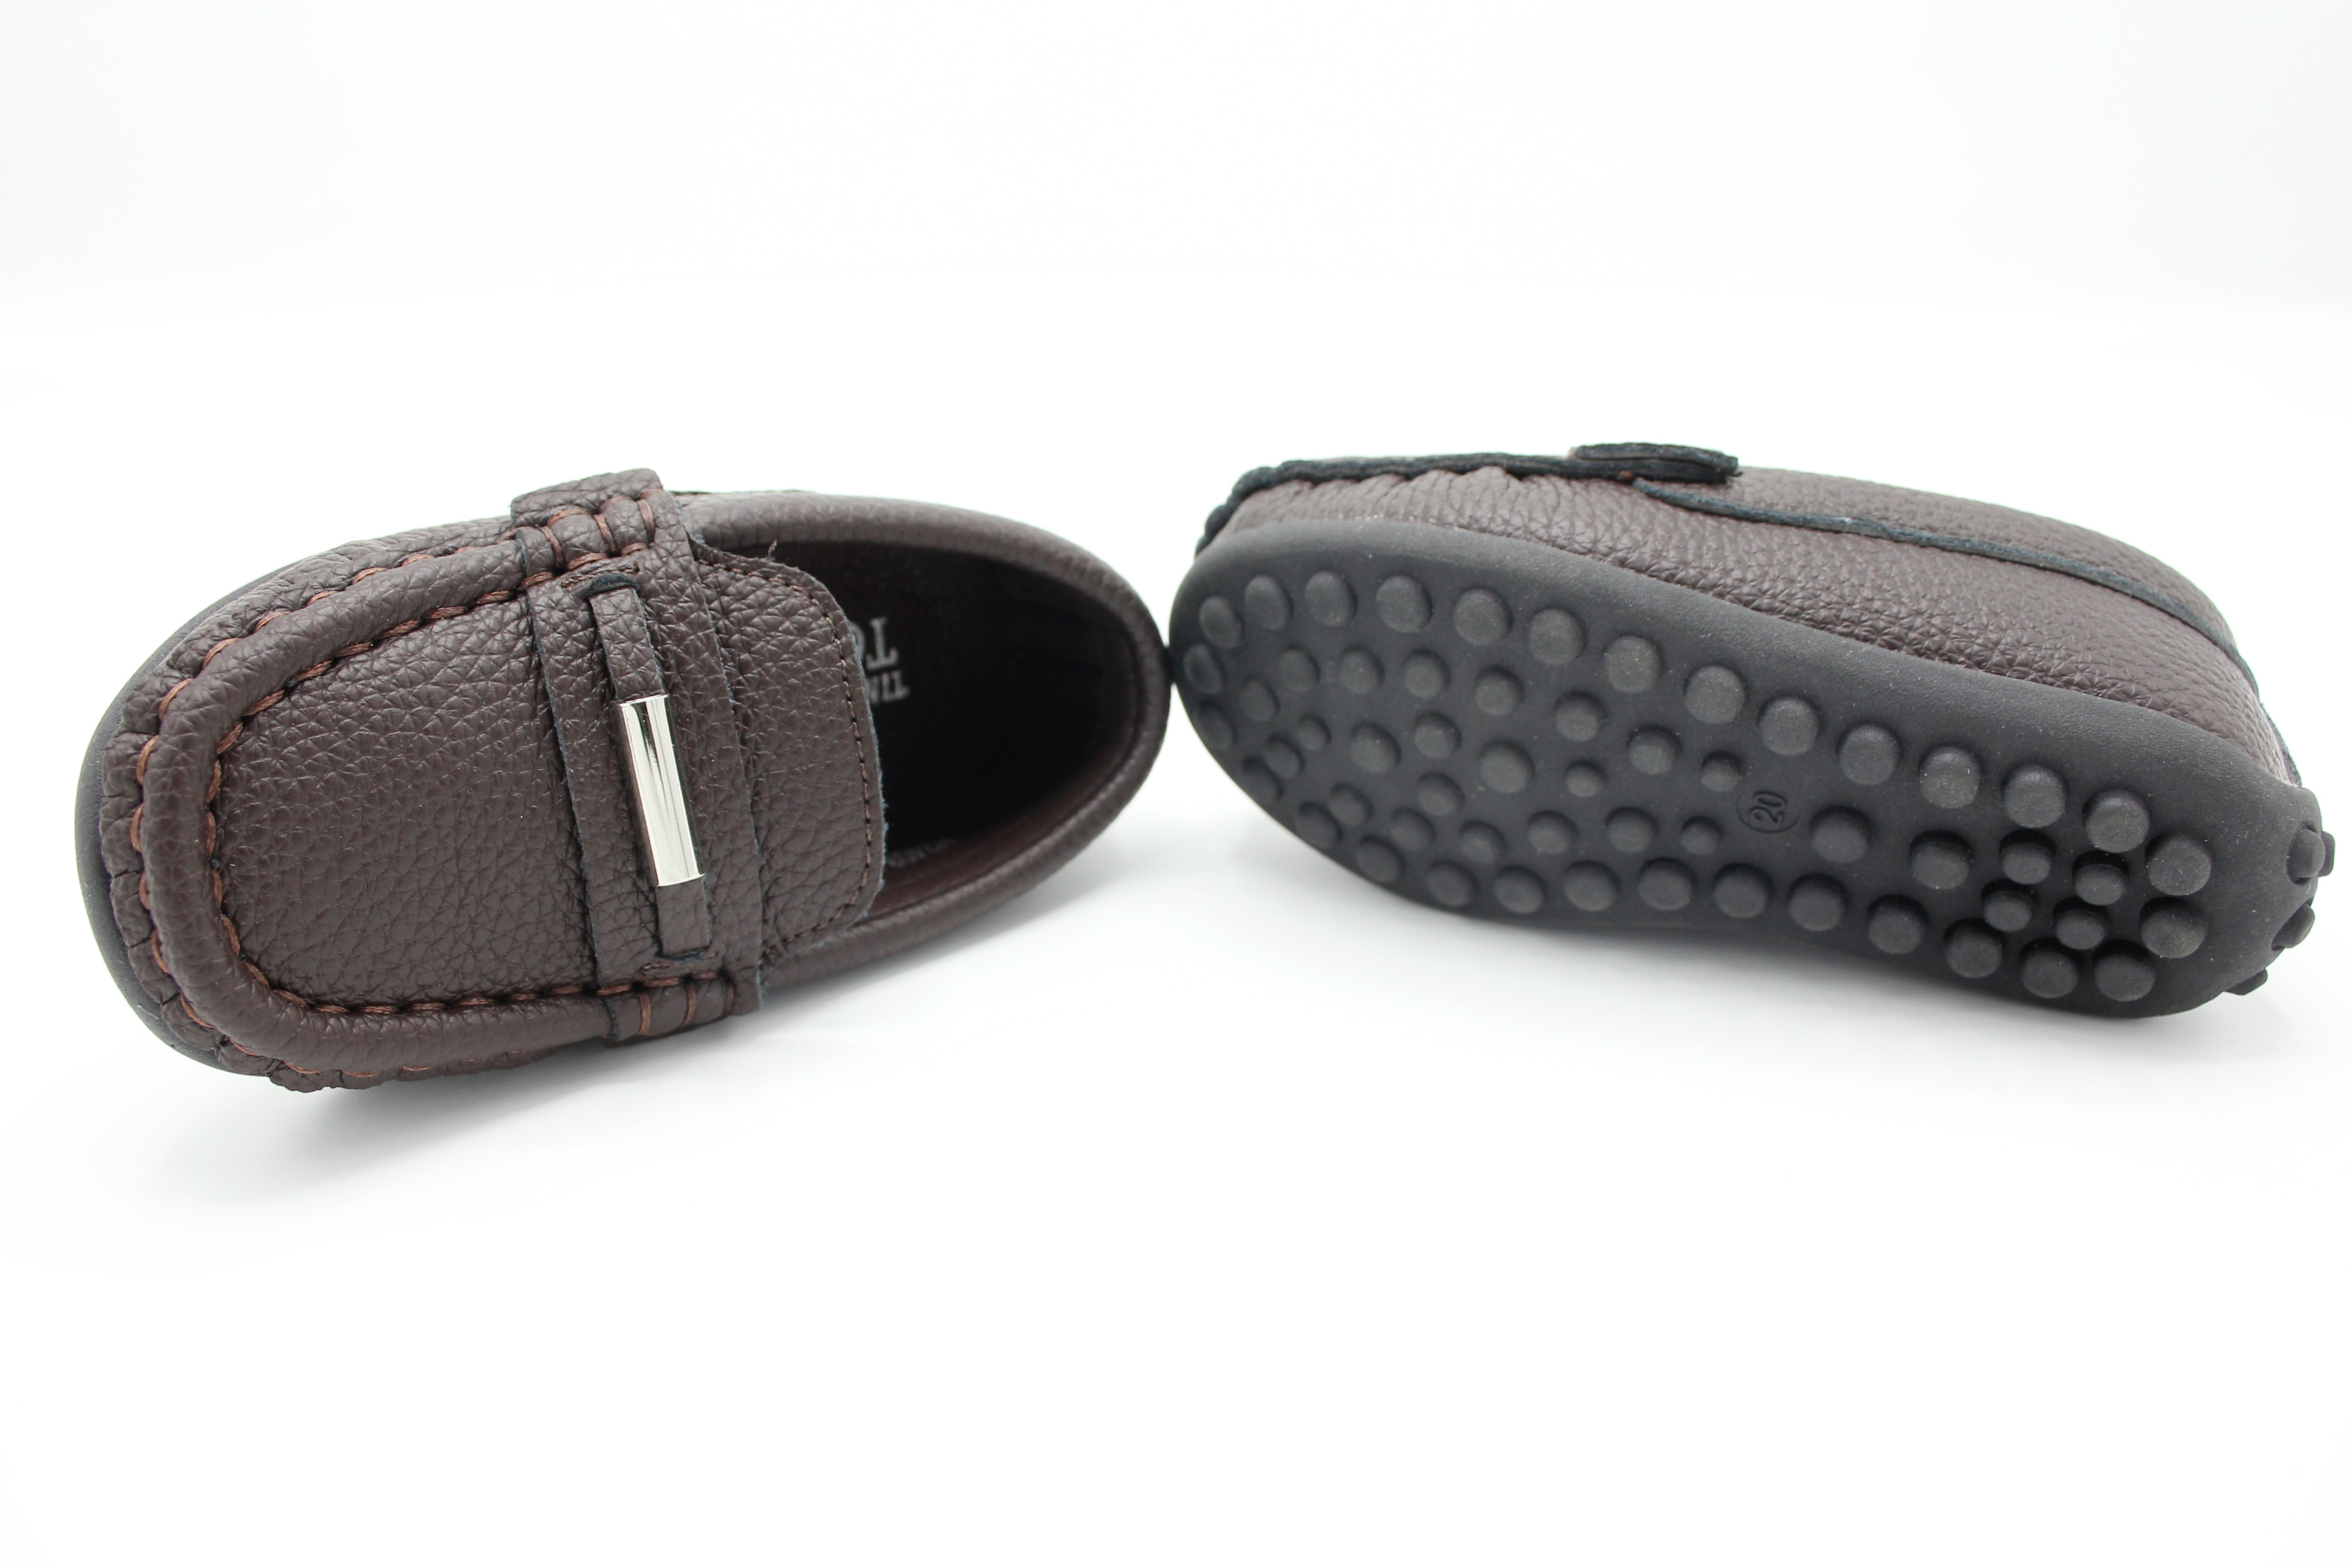 BABY BOY FORMAL LOAFERS - 31356